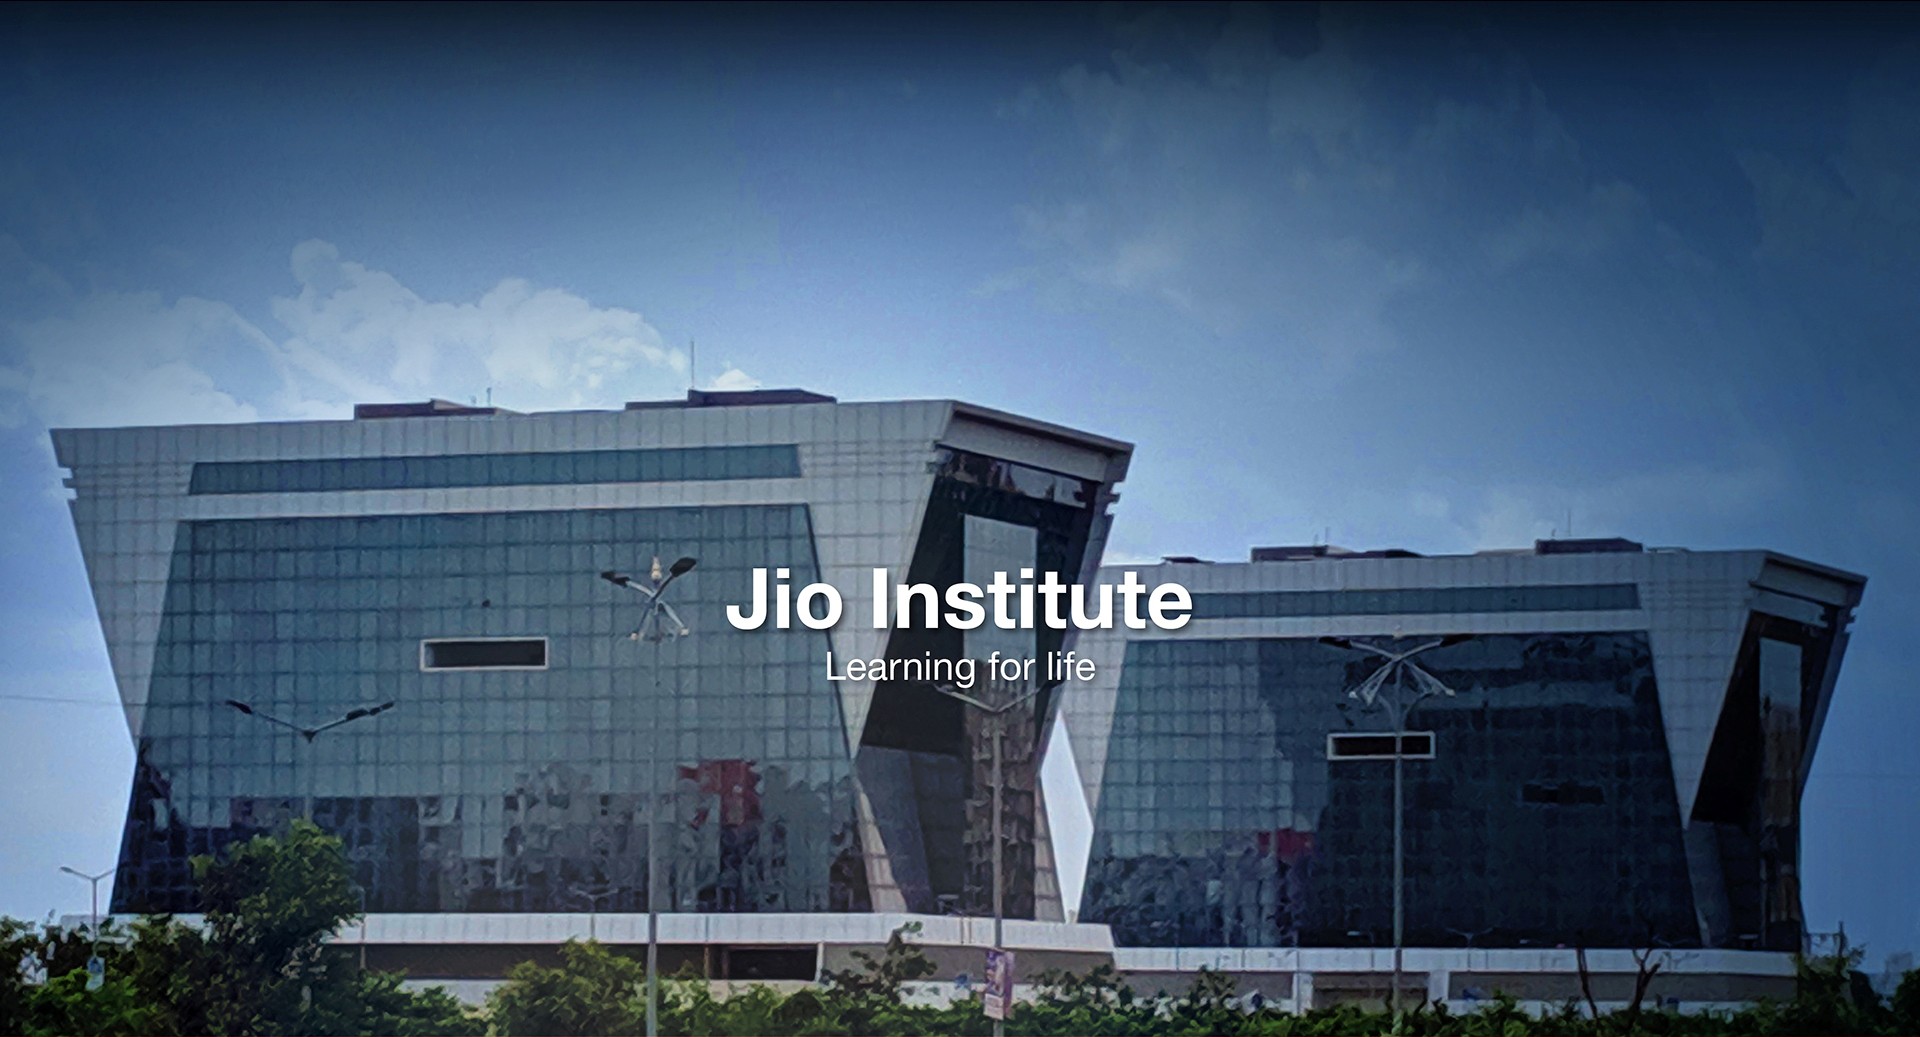 Jio Institute - Learning for Life